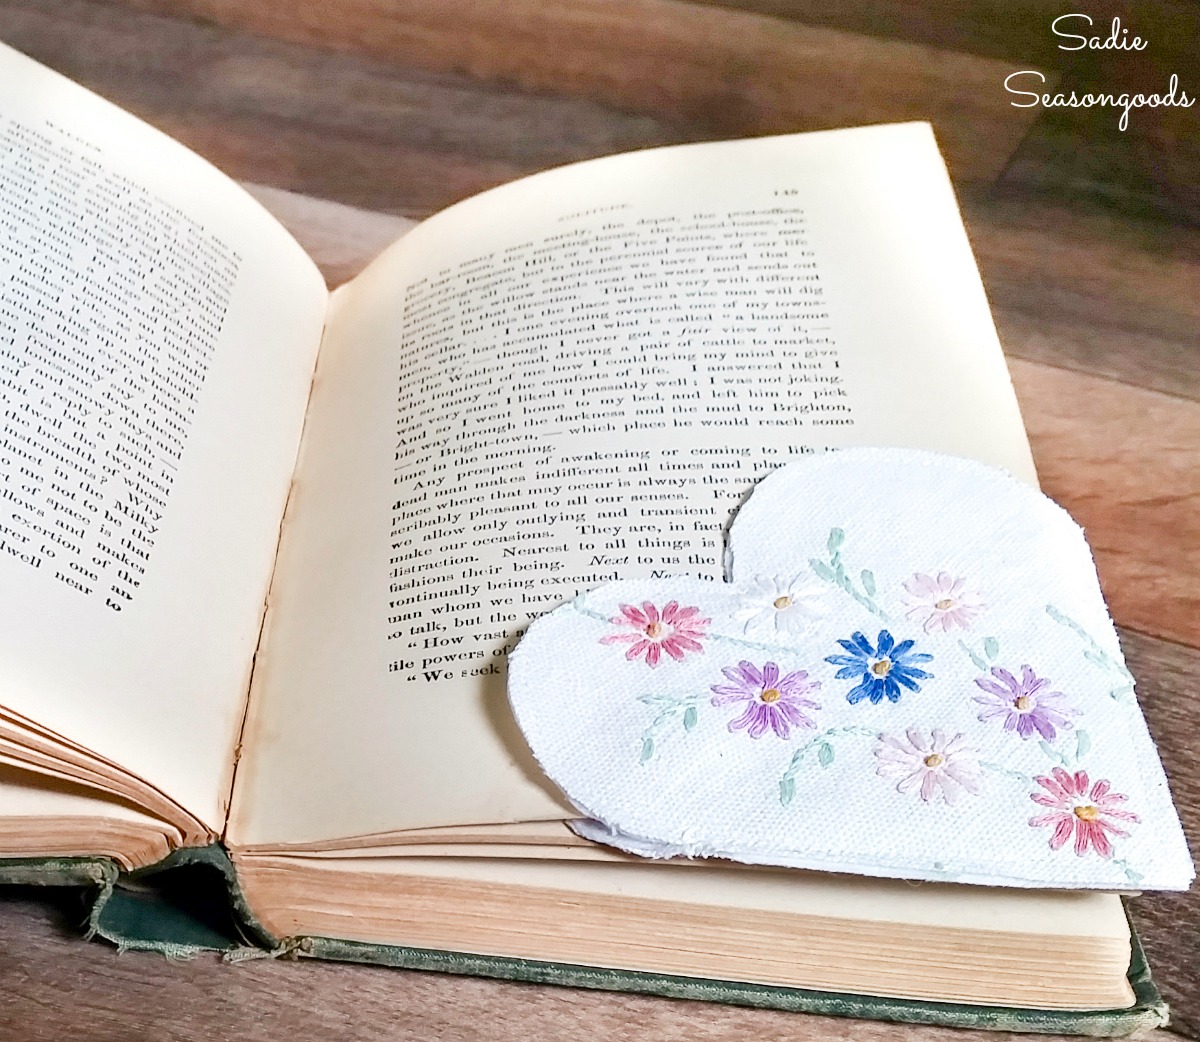 Upcycling the embroidered linens into DIY corner bookmarks